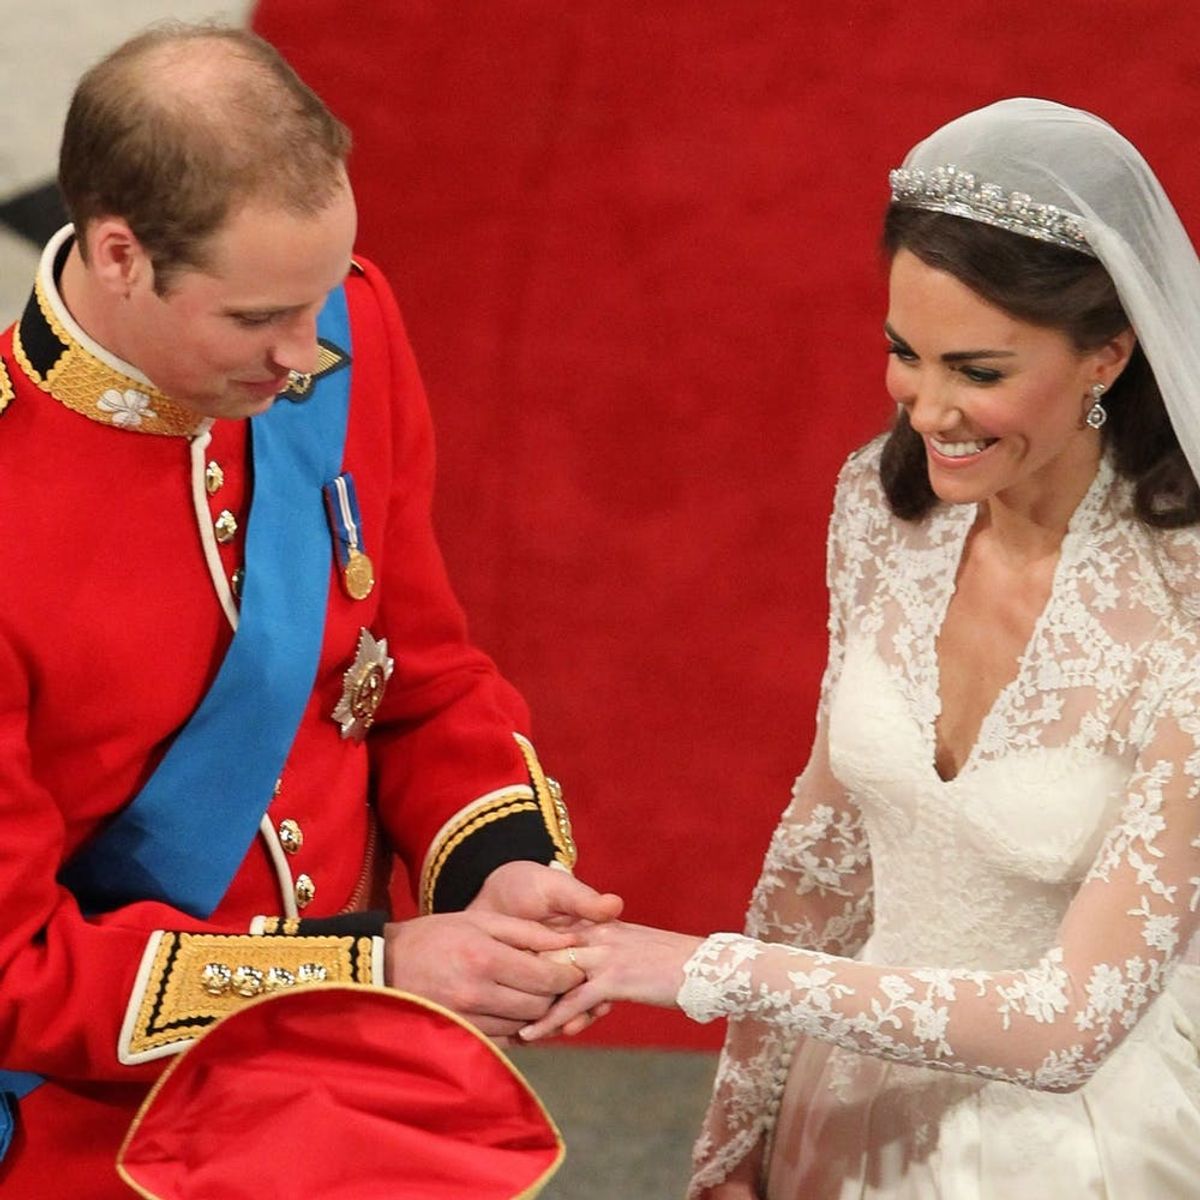 4 Unique Royal Wedding Traditions That Have Stood the Test of Time